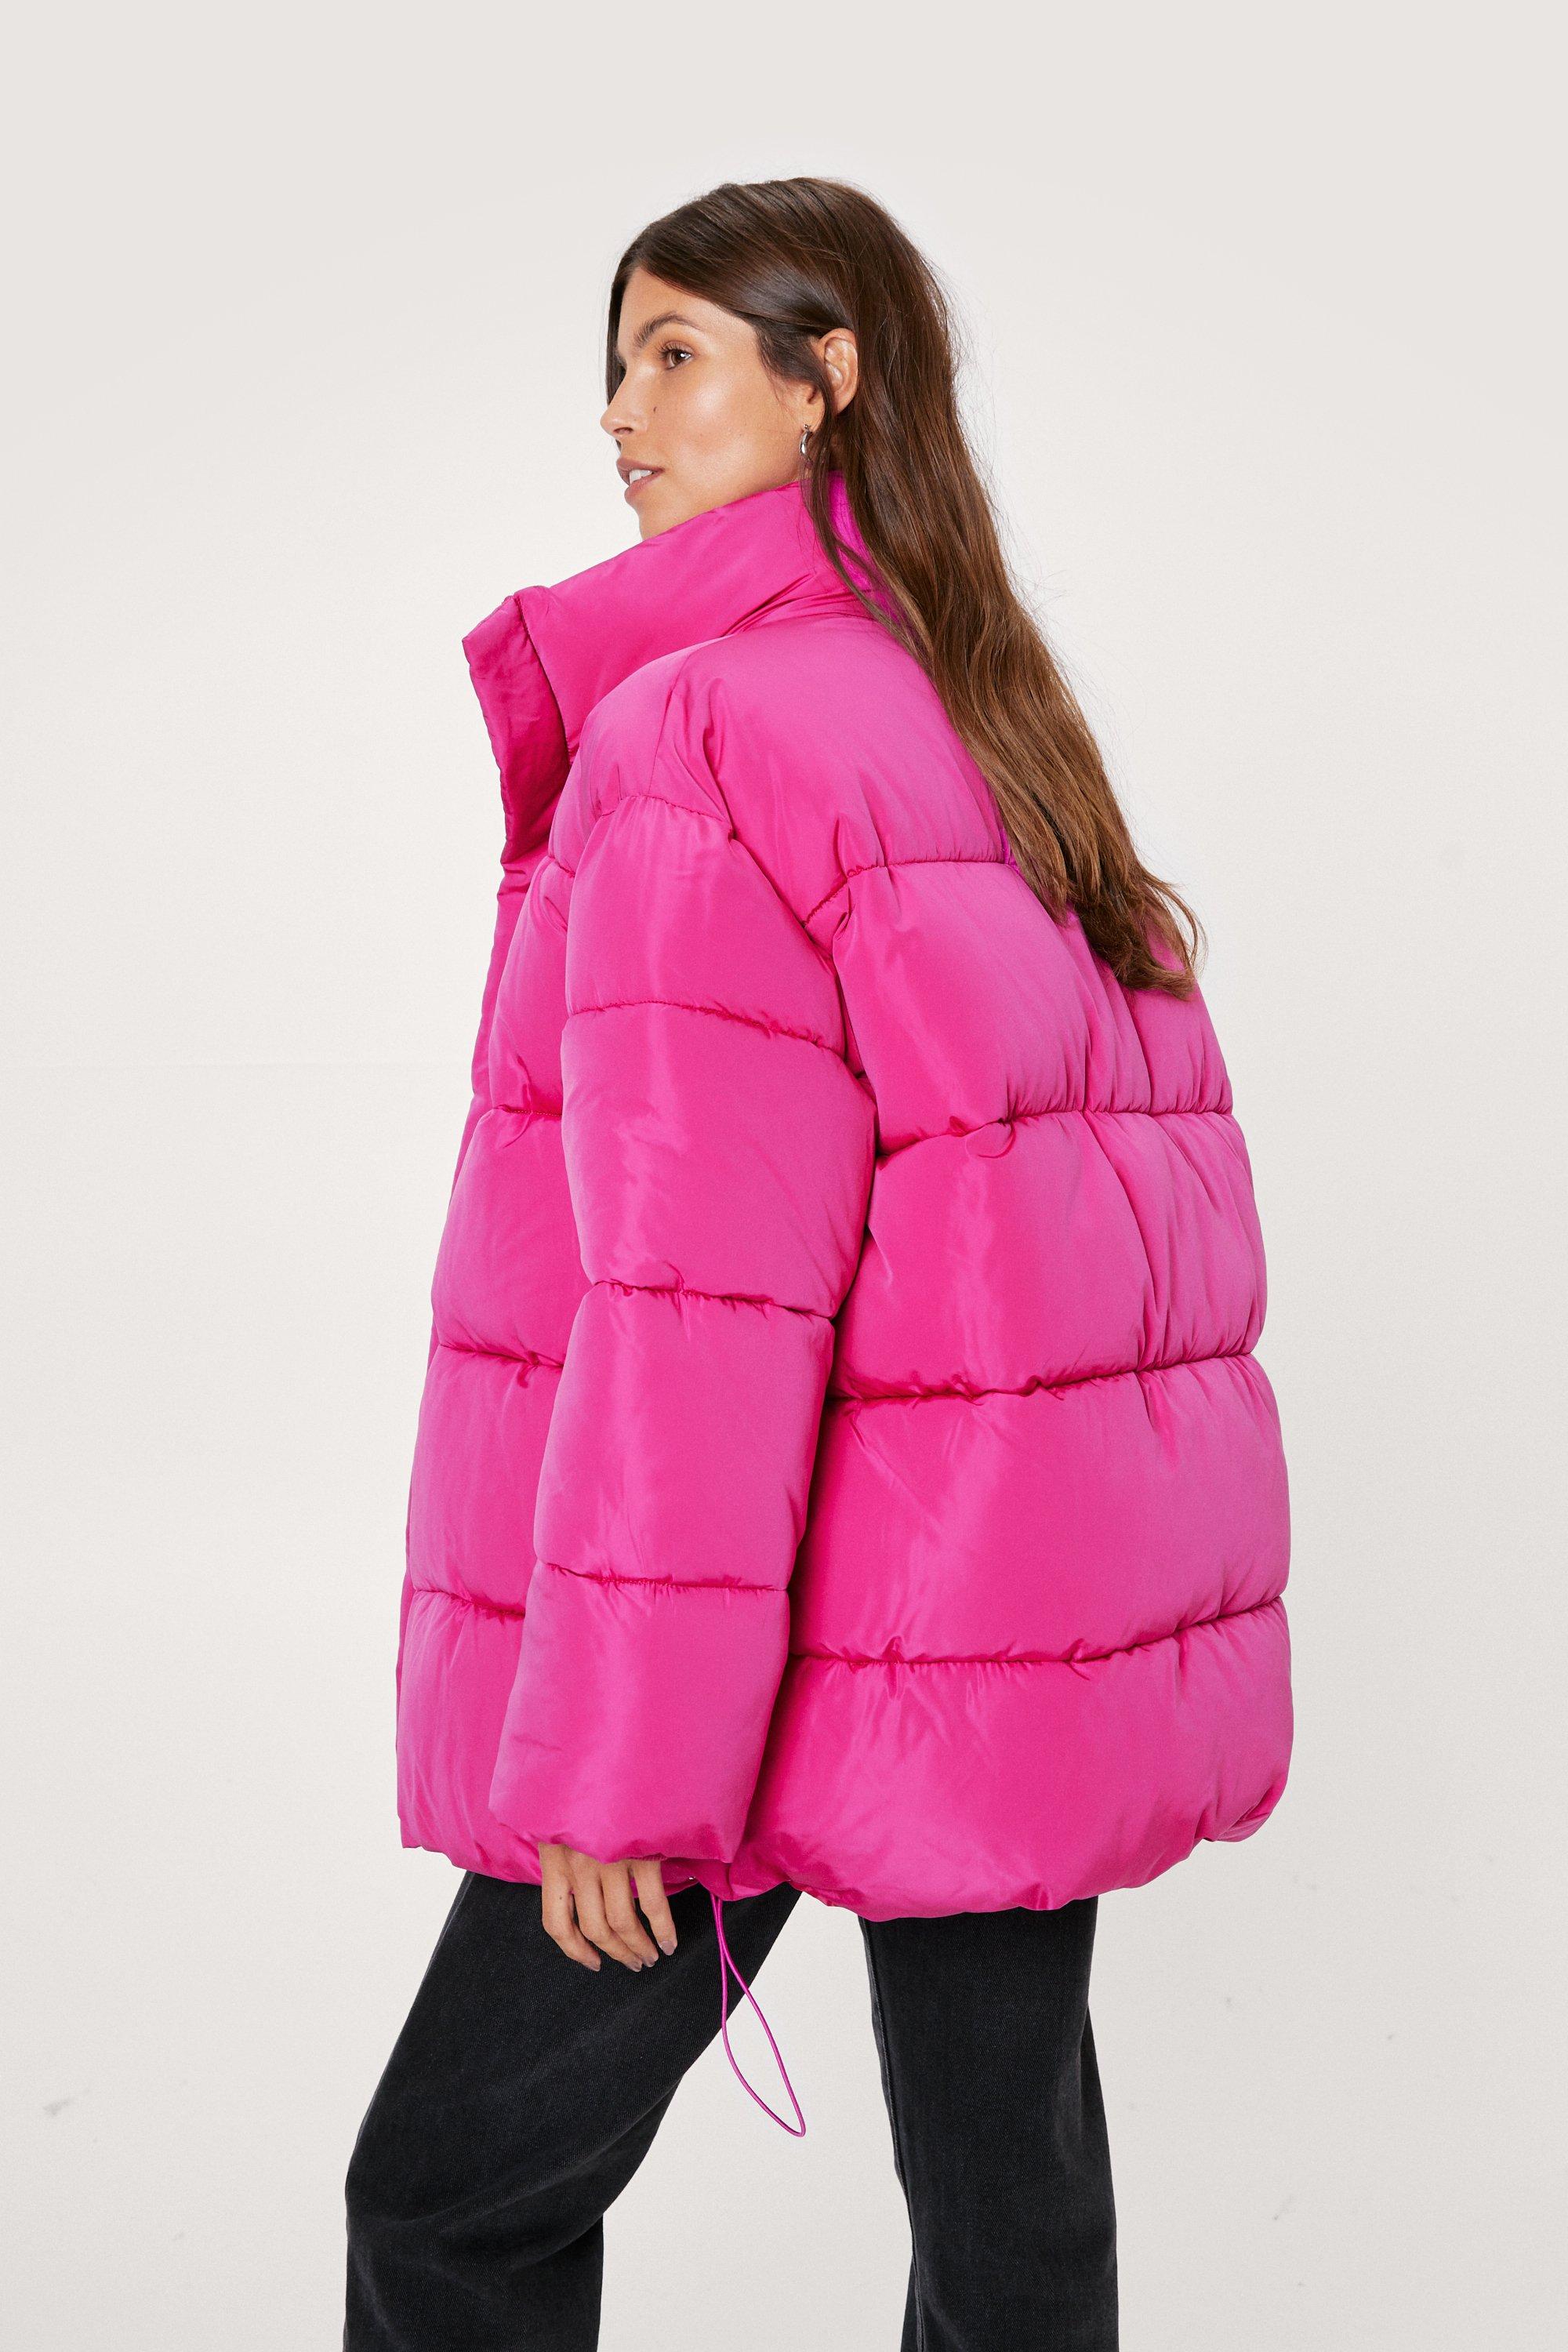 The 15 Best Puffer Jackets to Cozy Up in this Winter – May the Ray